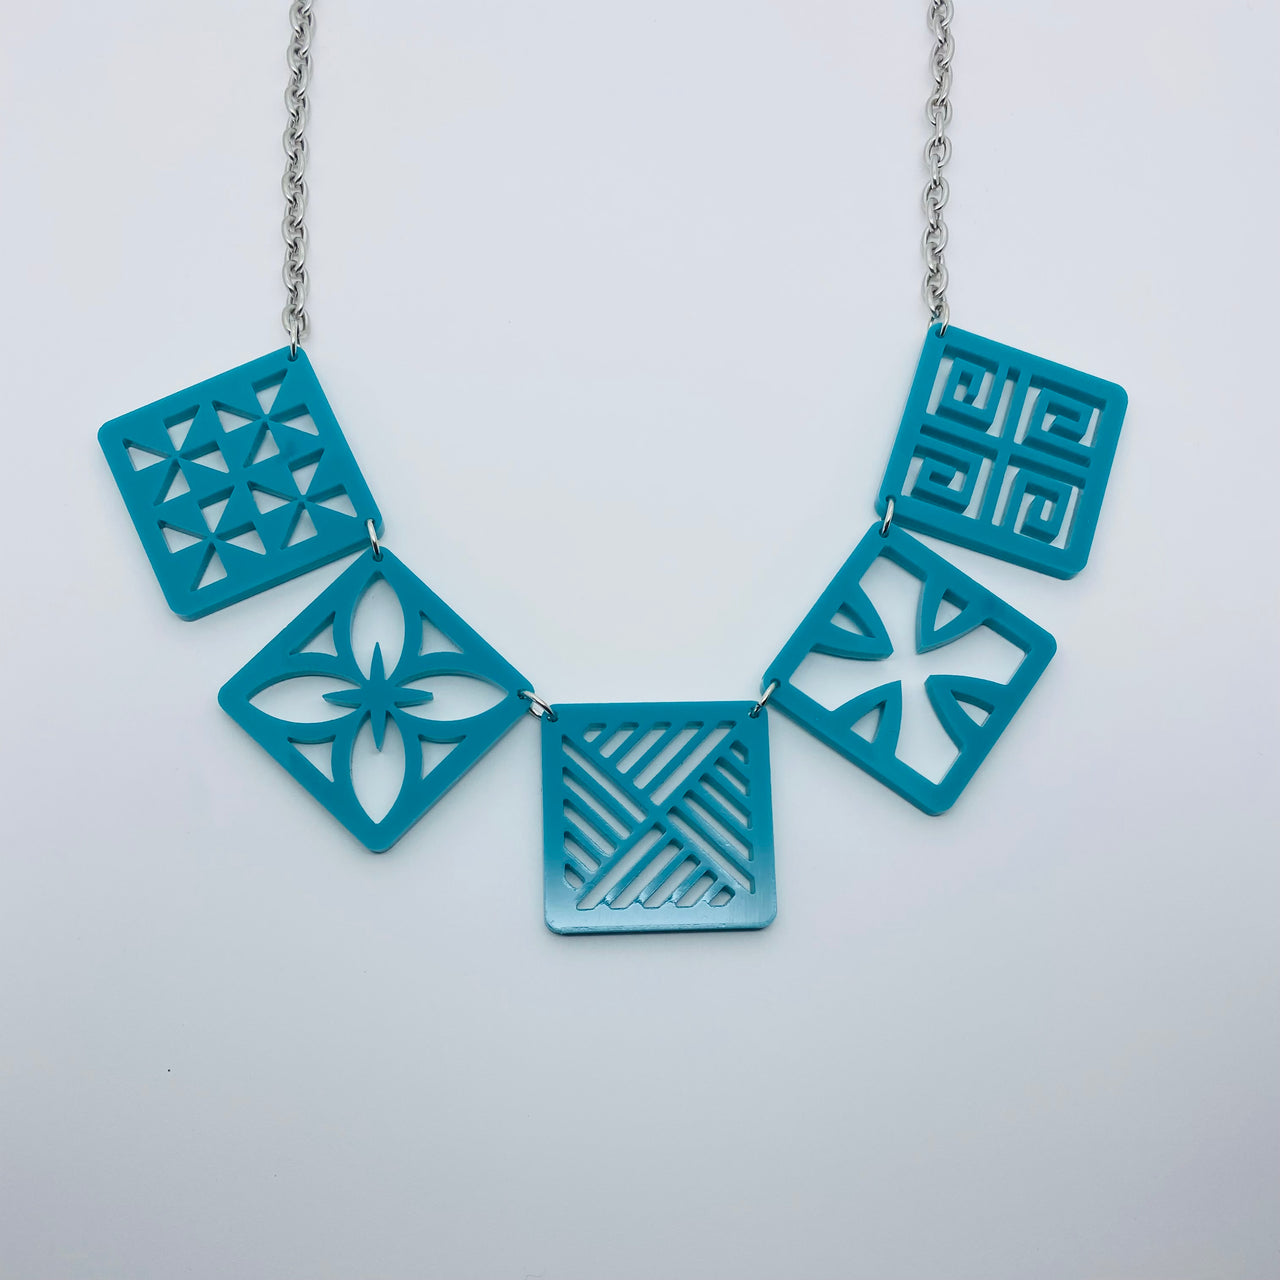 Flare Tiki Tapa Necklace in Teal